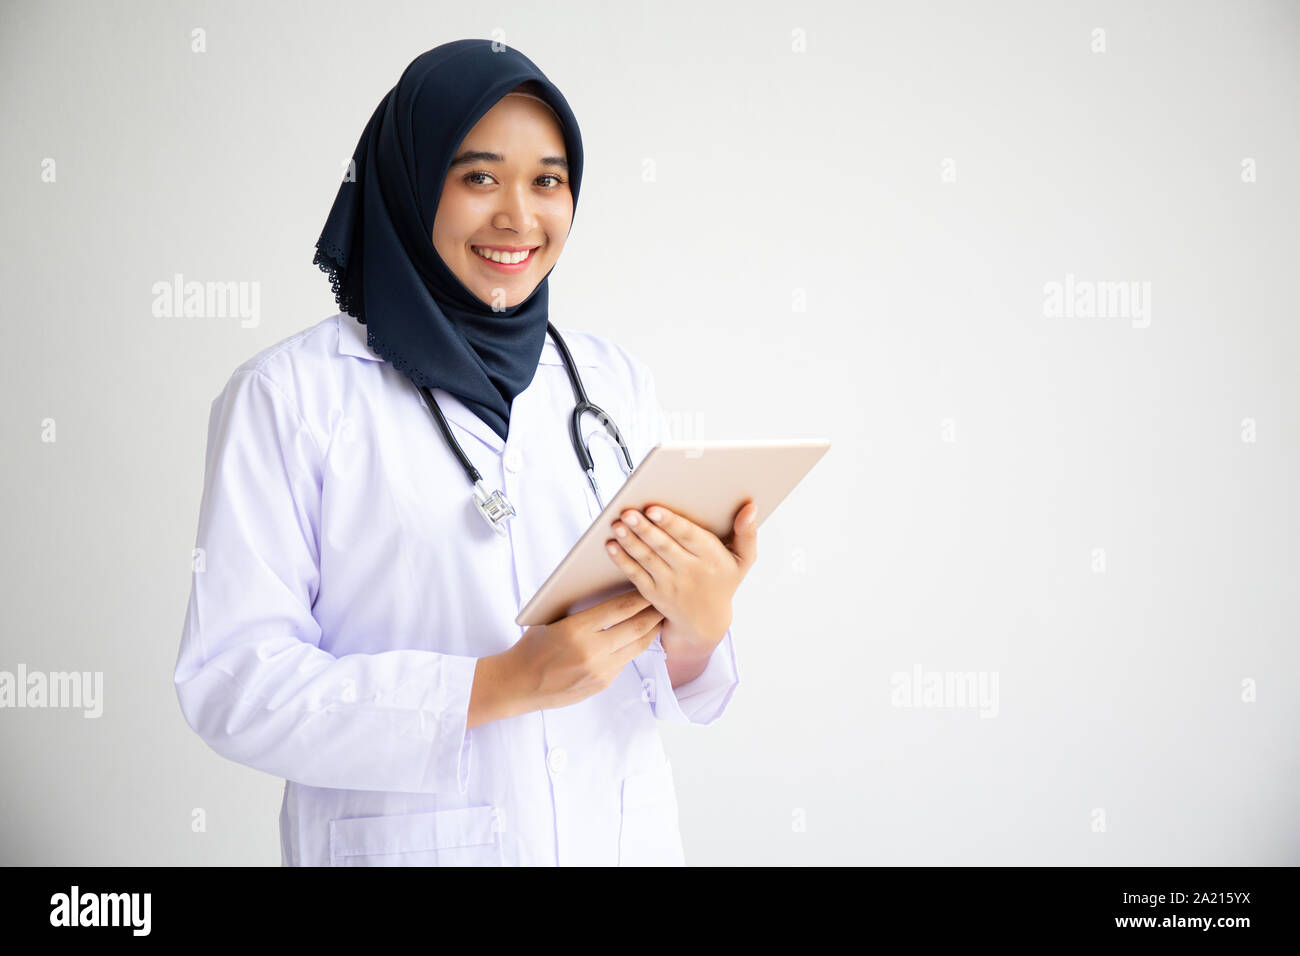 Young Arab Muslim Intern Doctor Women Smile On Isolate White Background Concept For Islam People 